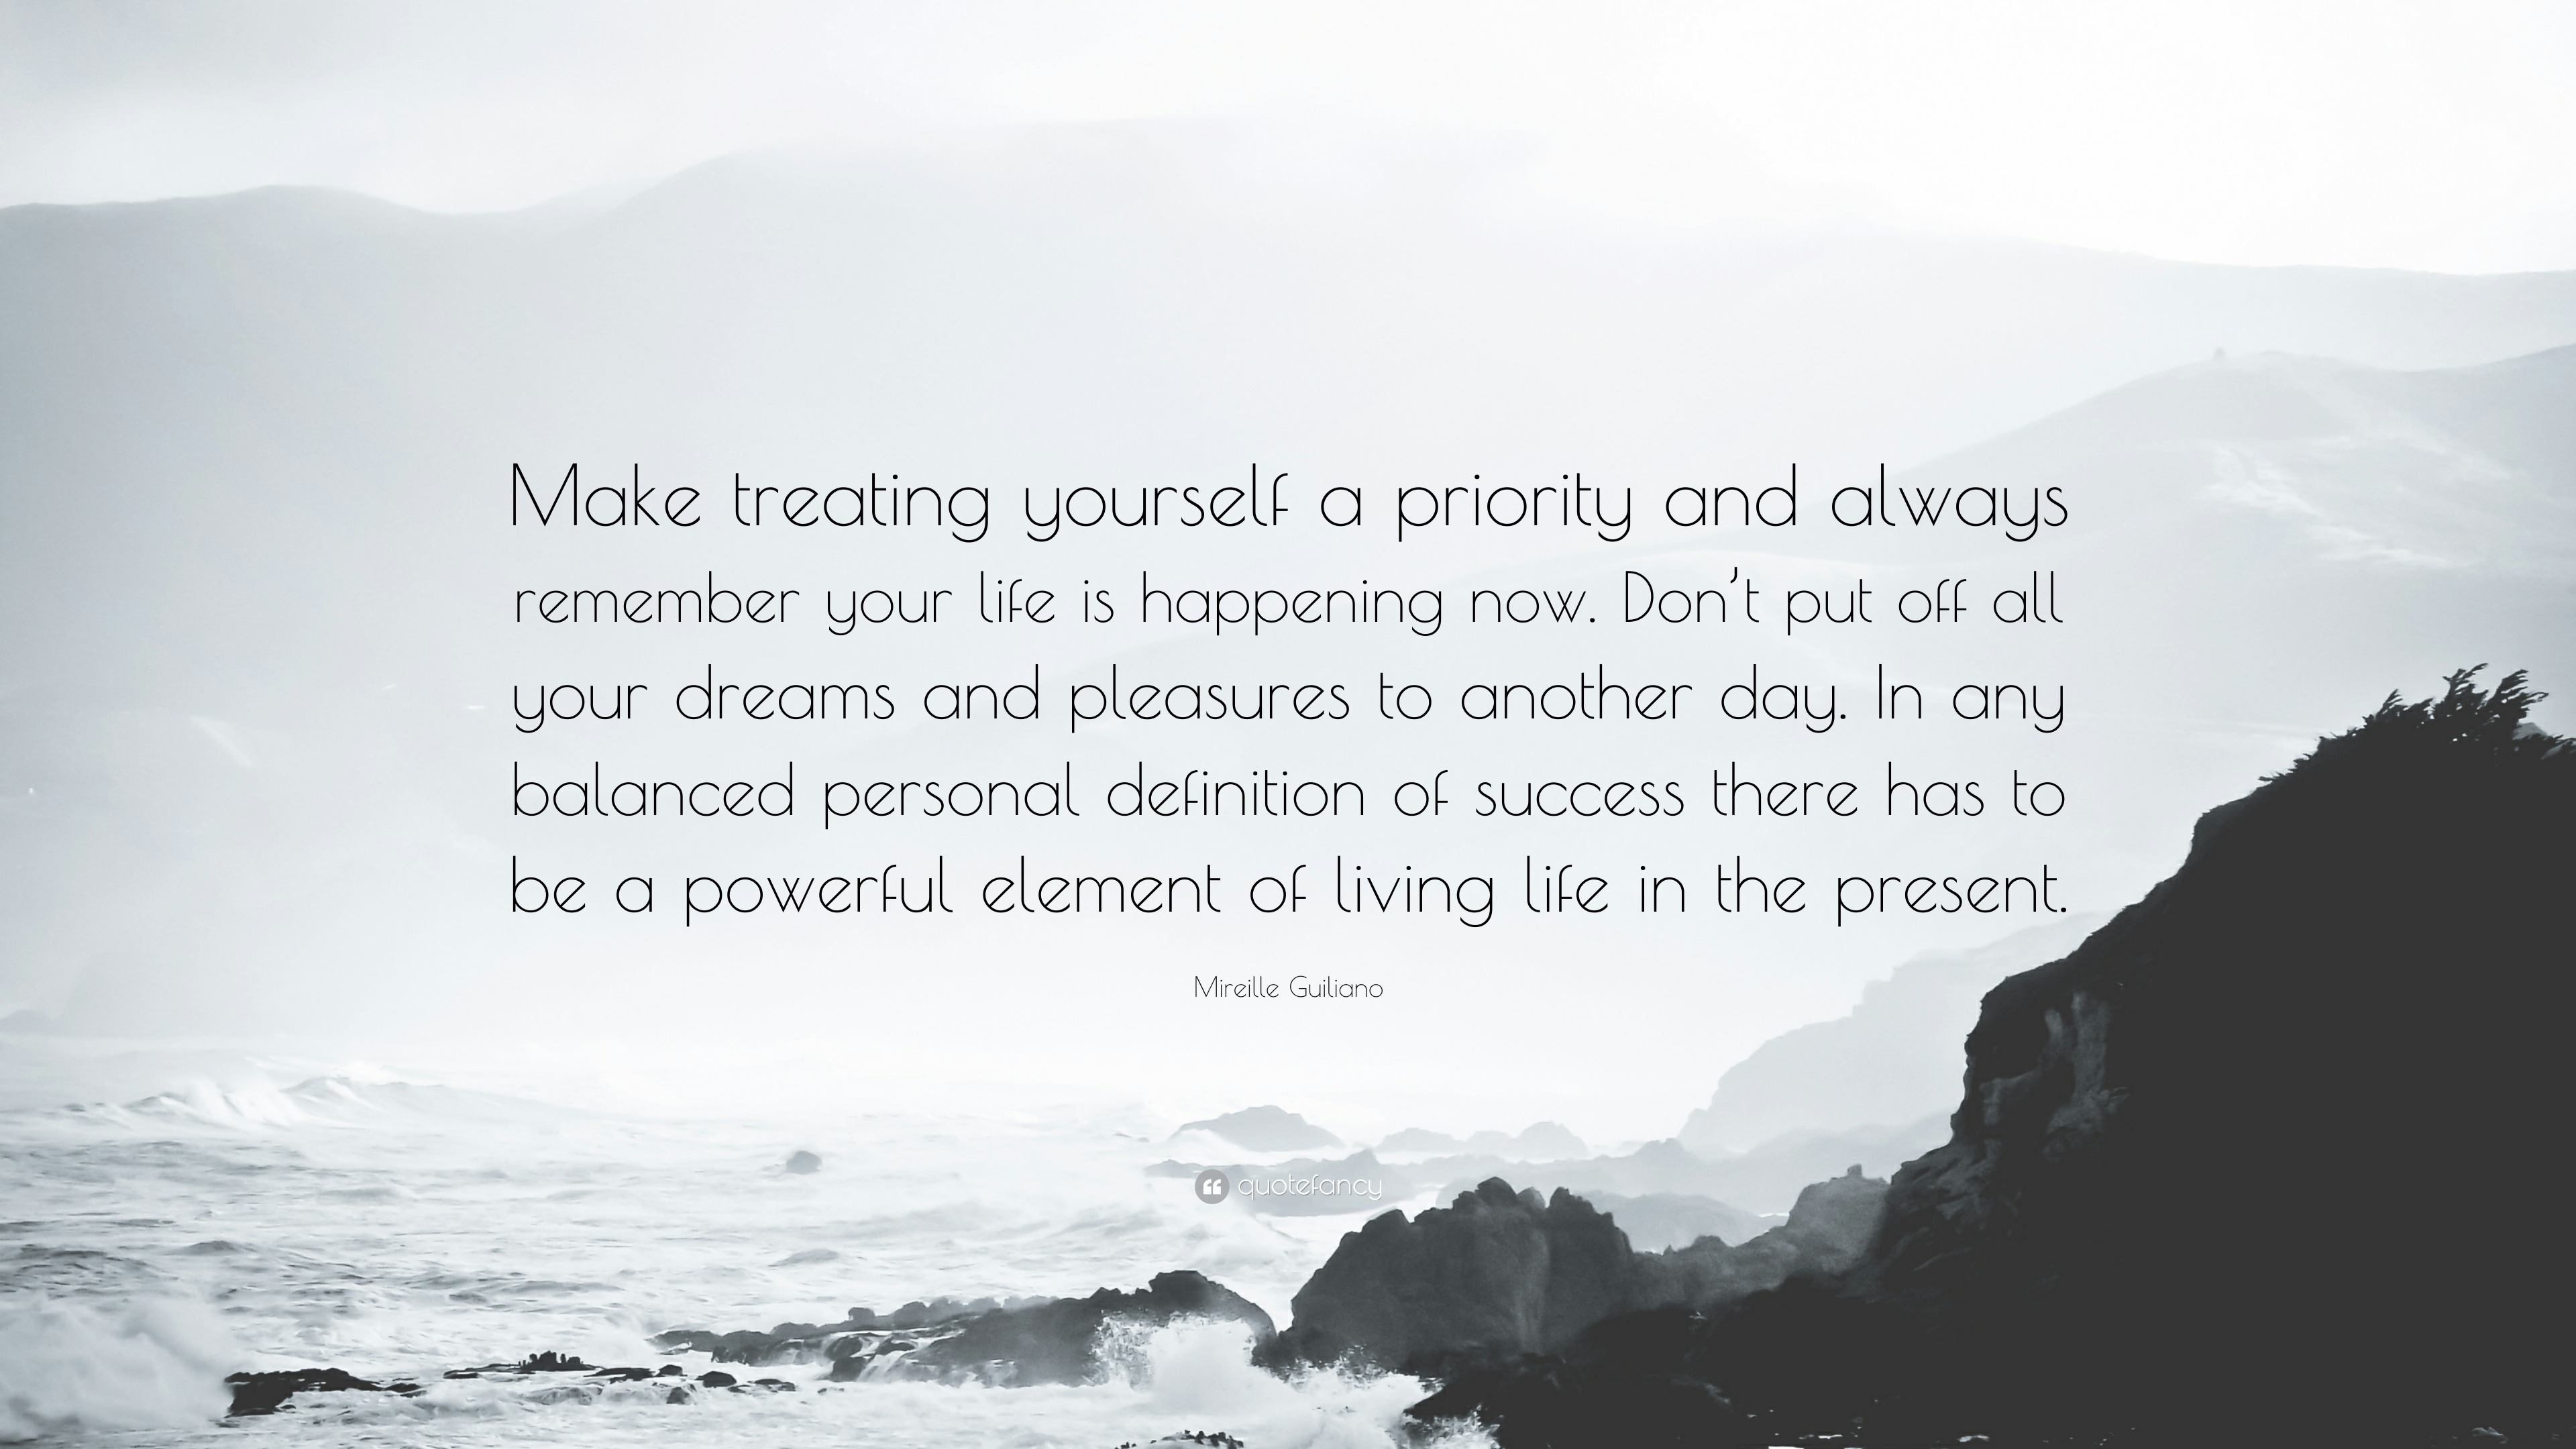 Mireille Guiliano Quote: “Make Treating Yourself A Priority And Always Remember Your Life Is Happening Now. Don't Put Off All Your Dreams And Plea...”